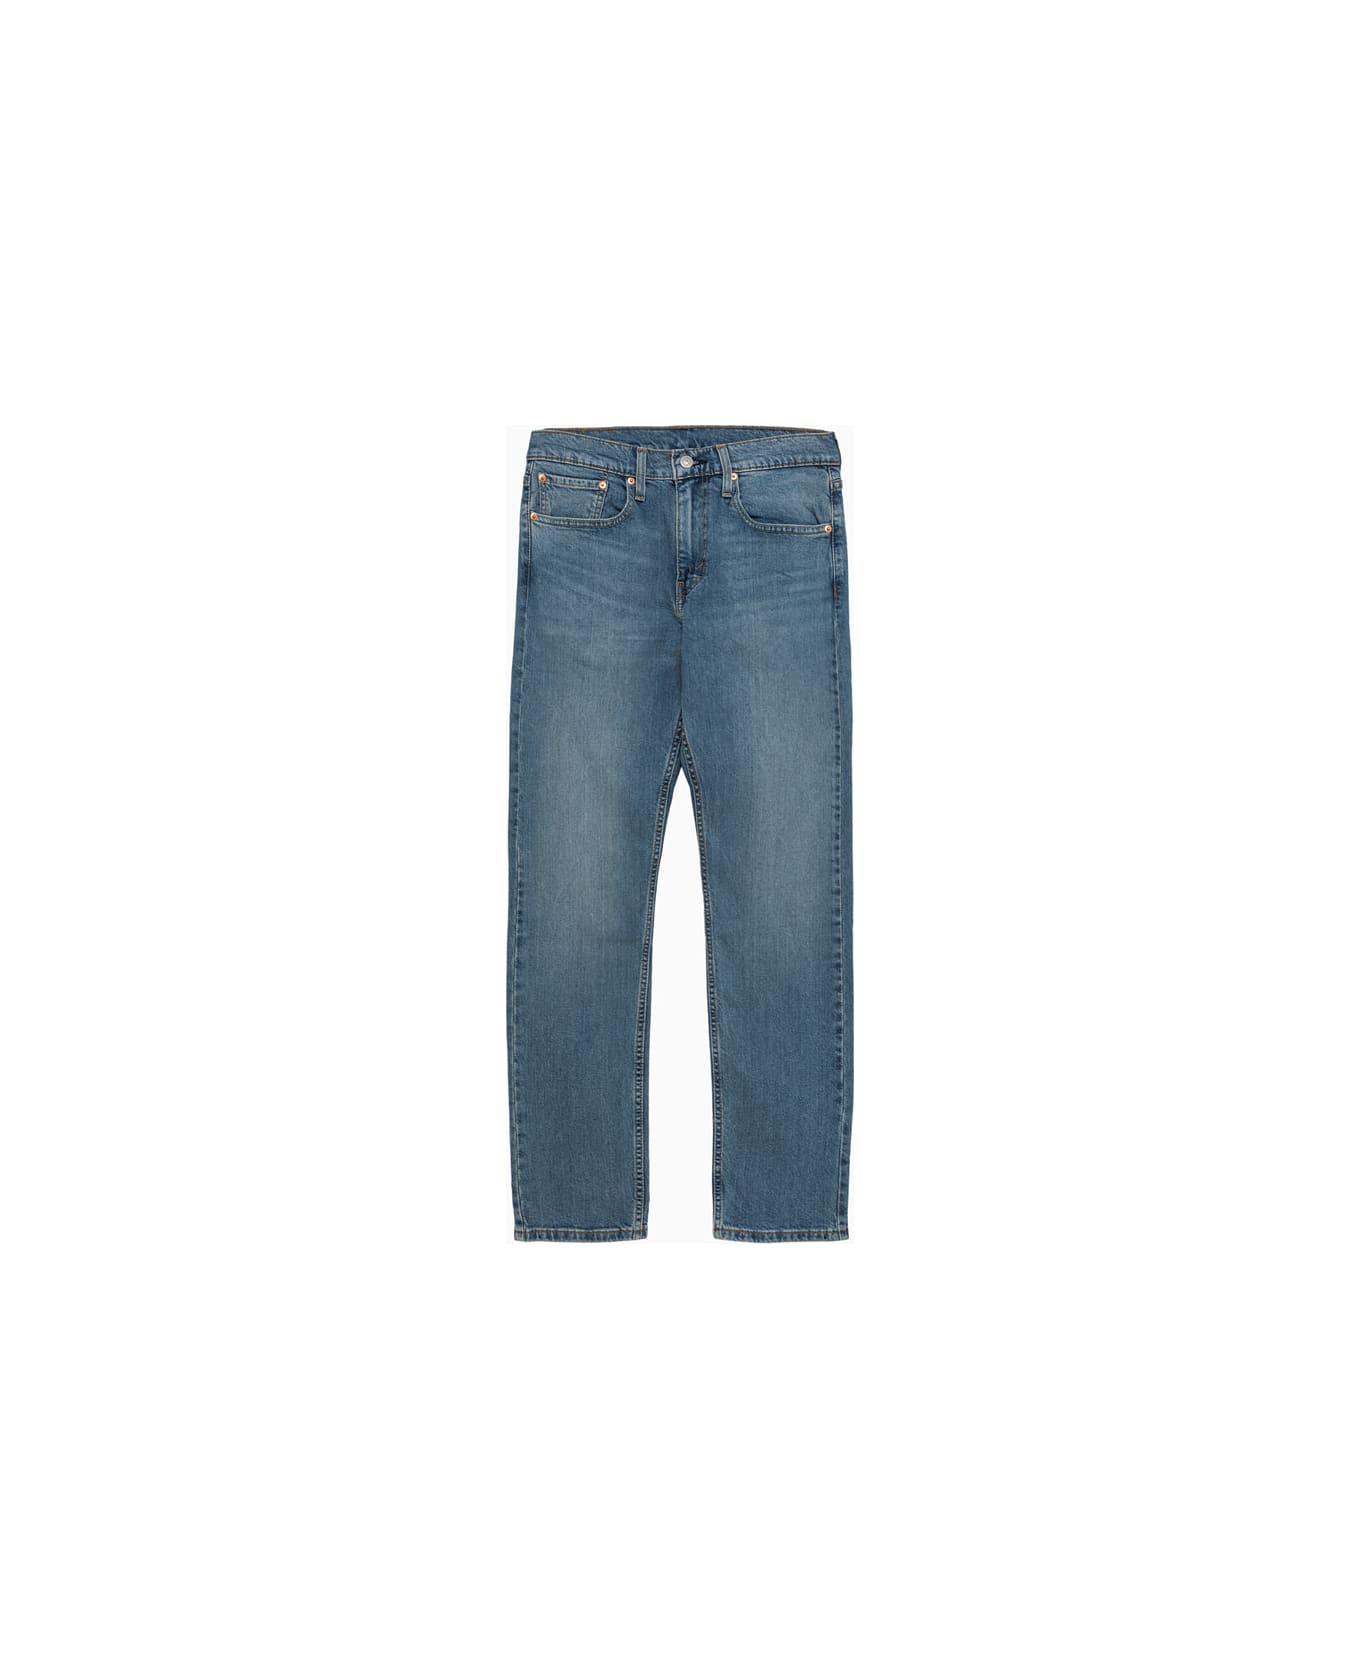 Levi's Levis 502 Into The Thick Of It Adv Jeans - Blue